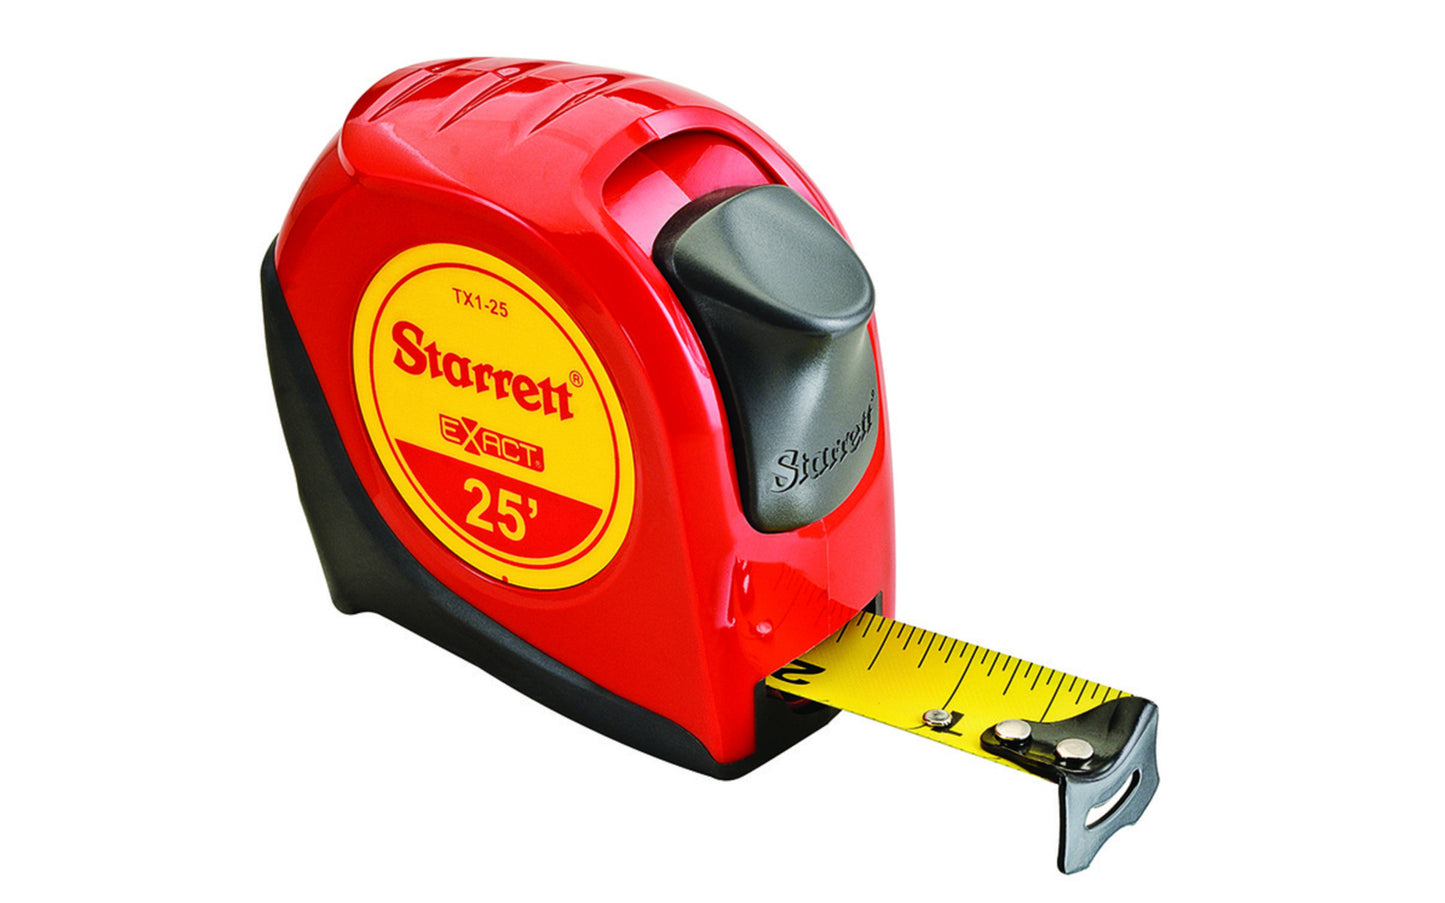 Starrett 1" x 25' Tape Measure. Produced of high durability ABS plastic for extended case life, these tape measures offer overmold for improved grip. Their ergonomic design fits comfortably in the hand and incorporate industry standard standout, and improved blade protection.